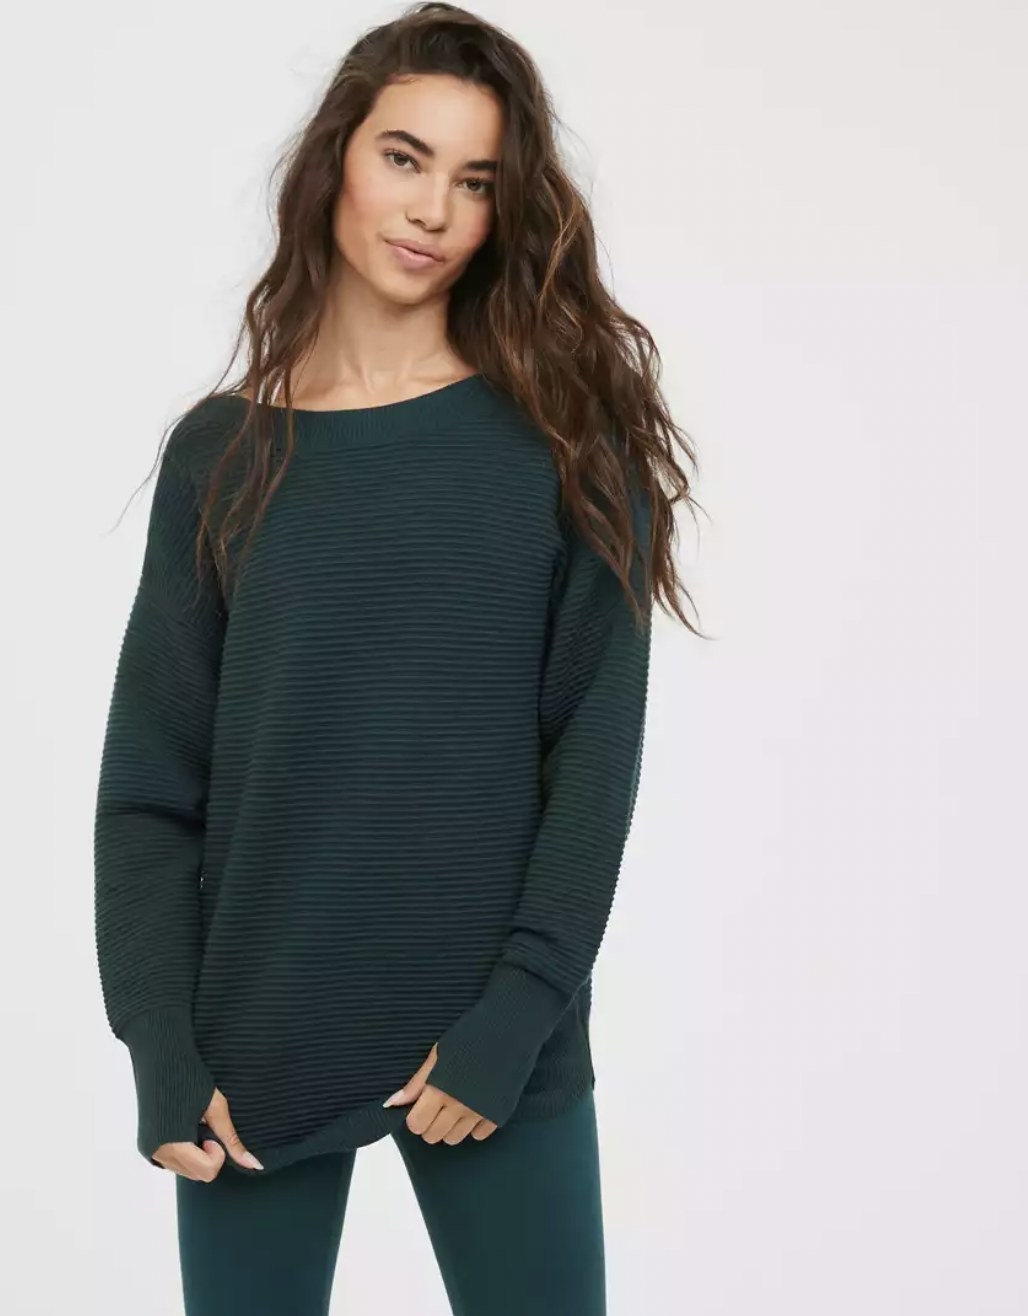 20 Stylish, Cozy, And Comfy Things From Aerie To Wear This Fall